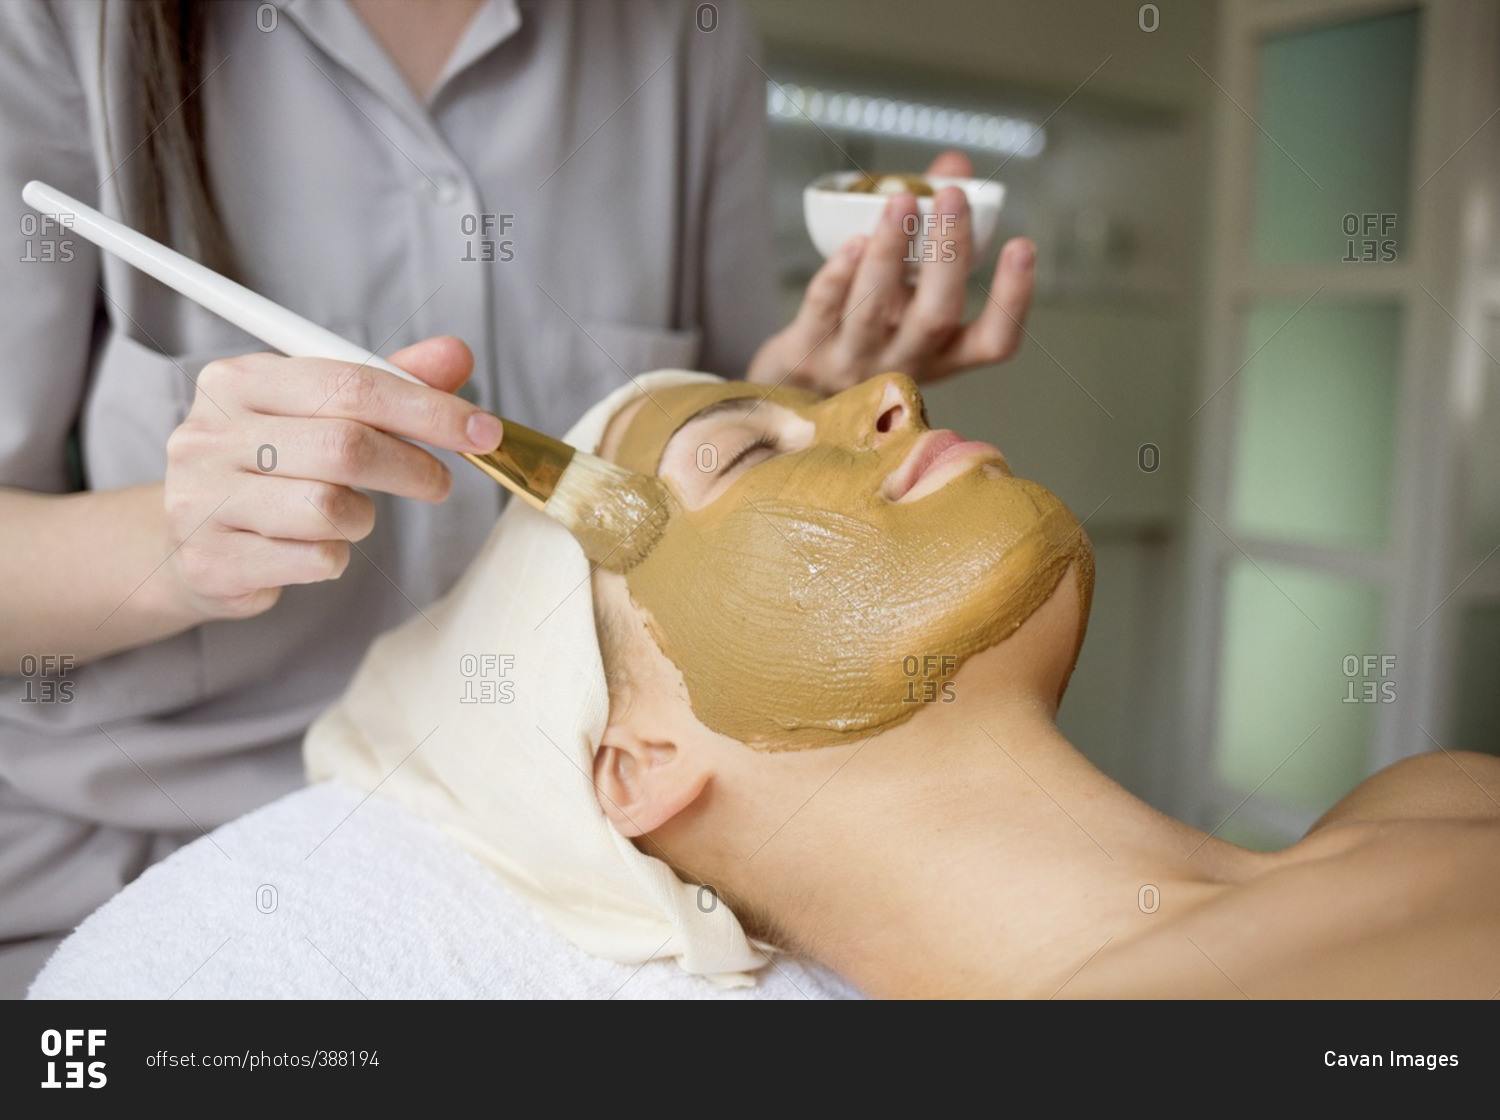 Female therapist applying facial mask on woman's face in spa